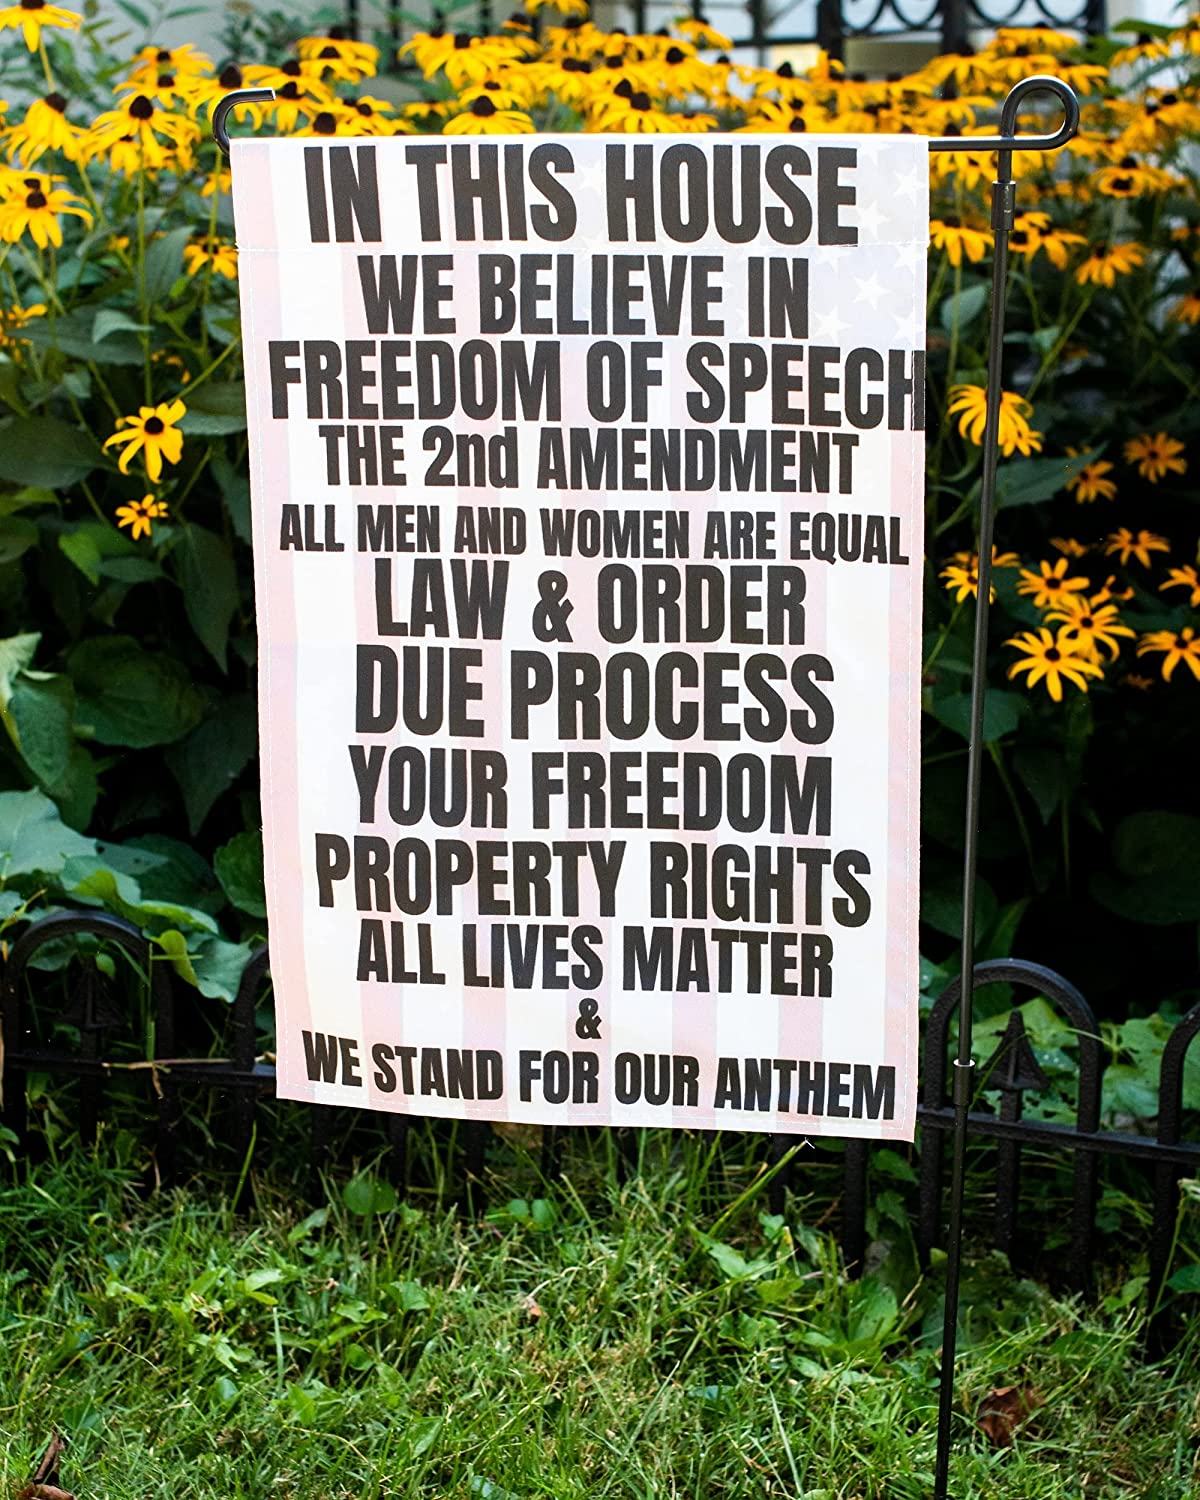 In this house we believe in the 2nd amendment Garden Flag, 12"X18" Conservative Patriotic Free Speech Yard Sign